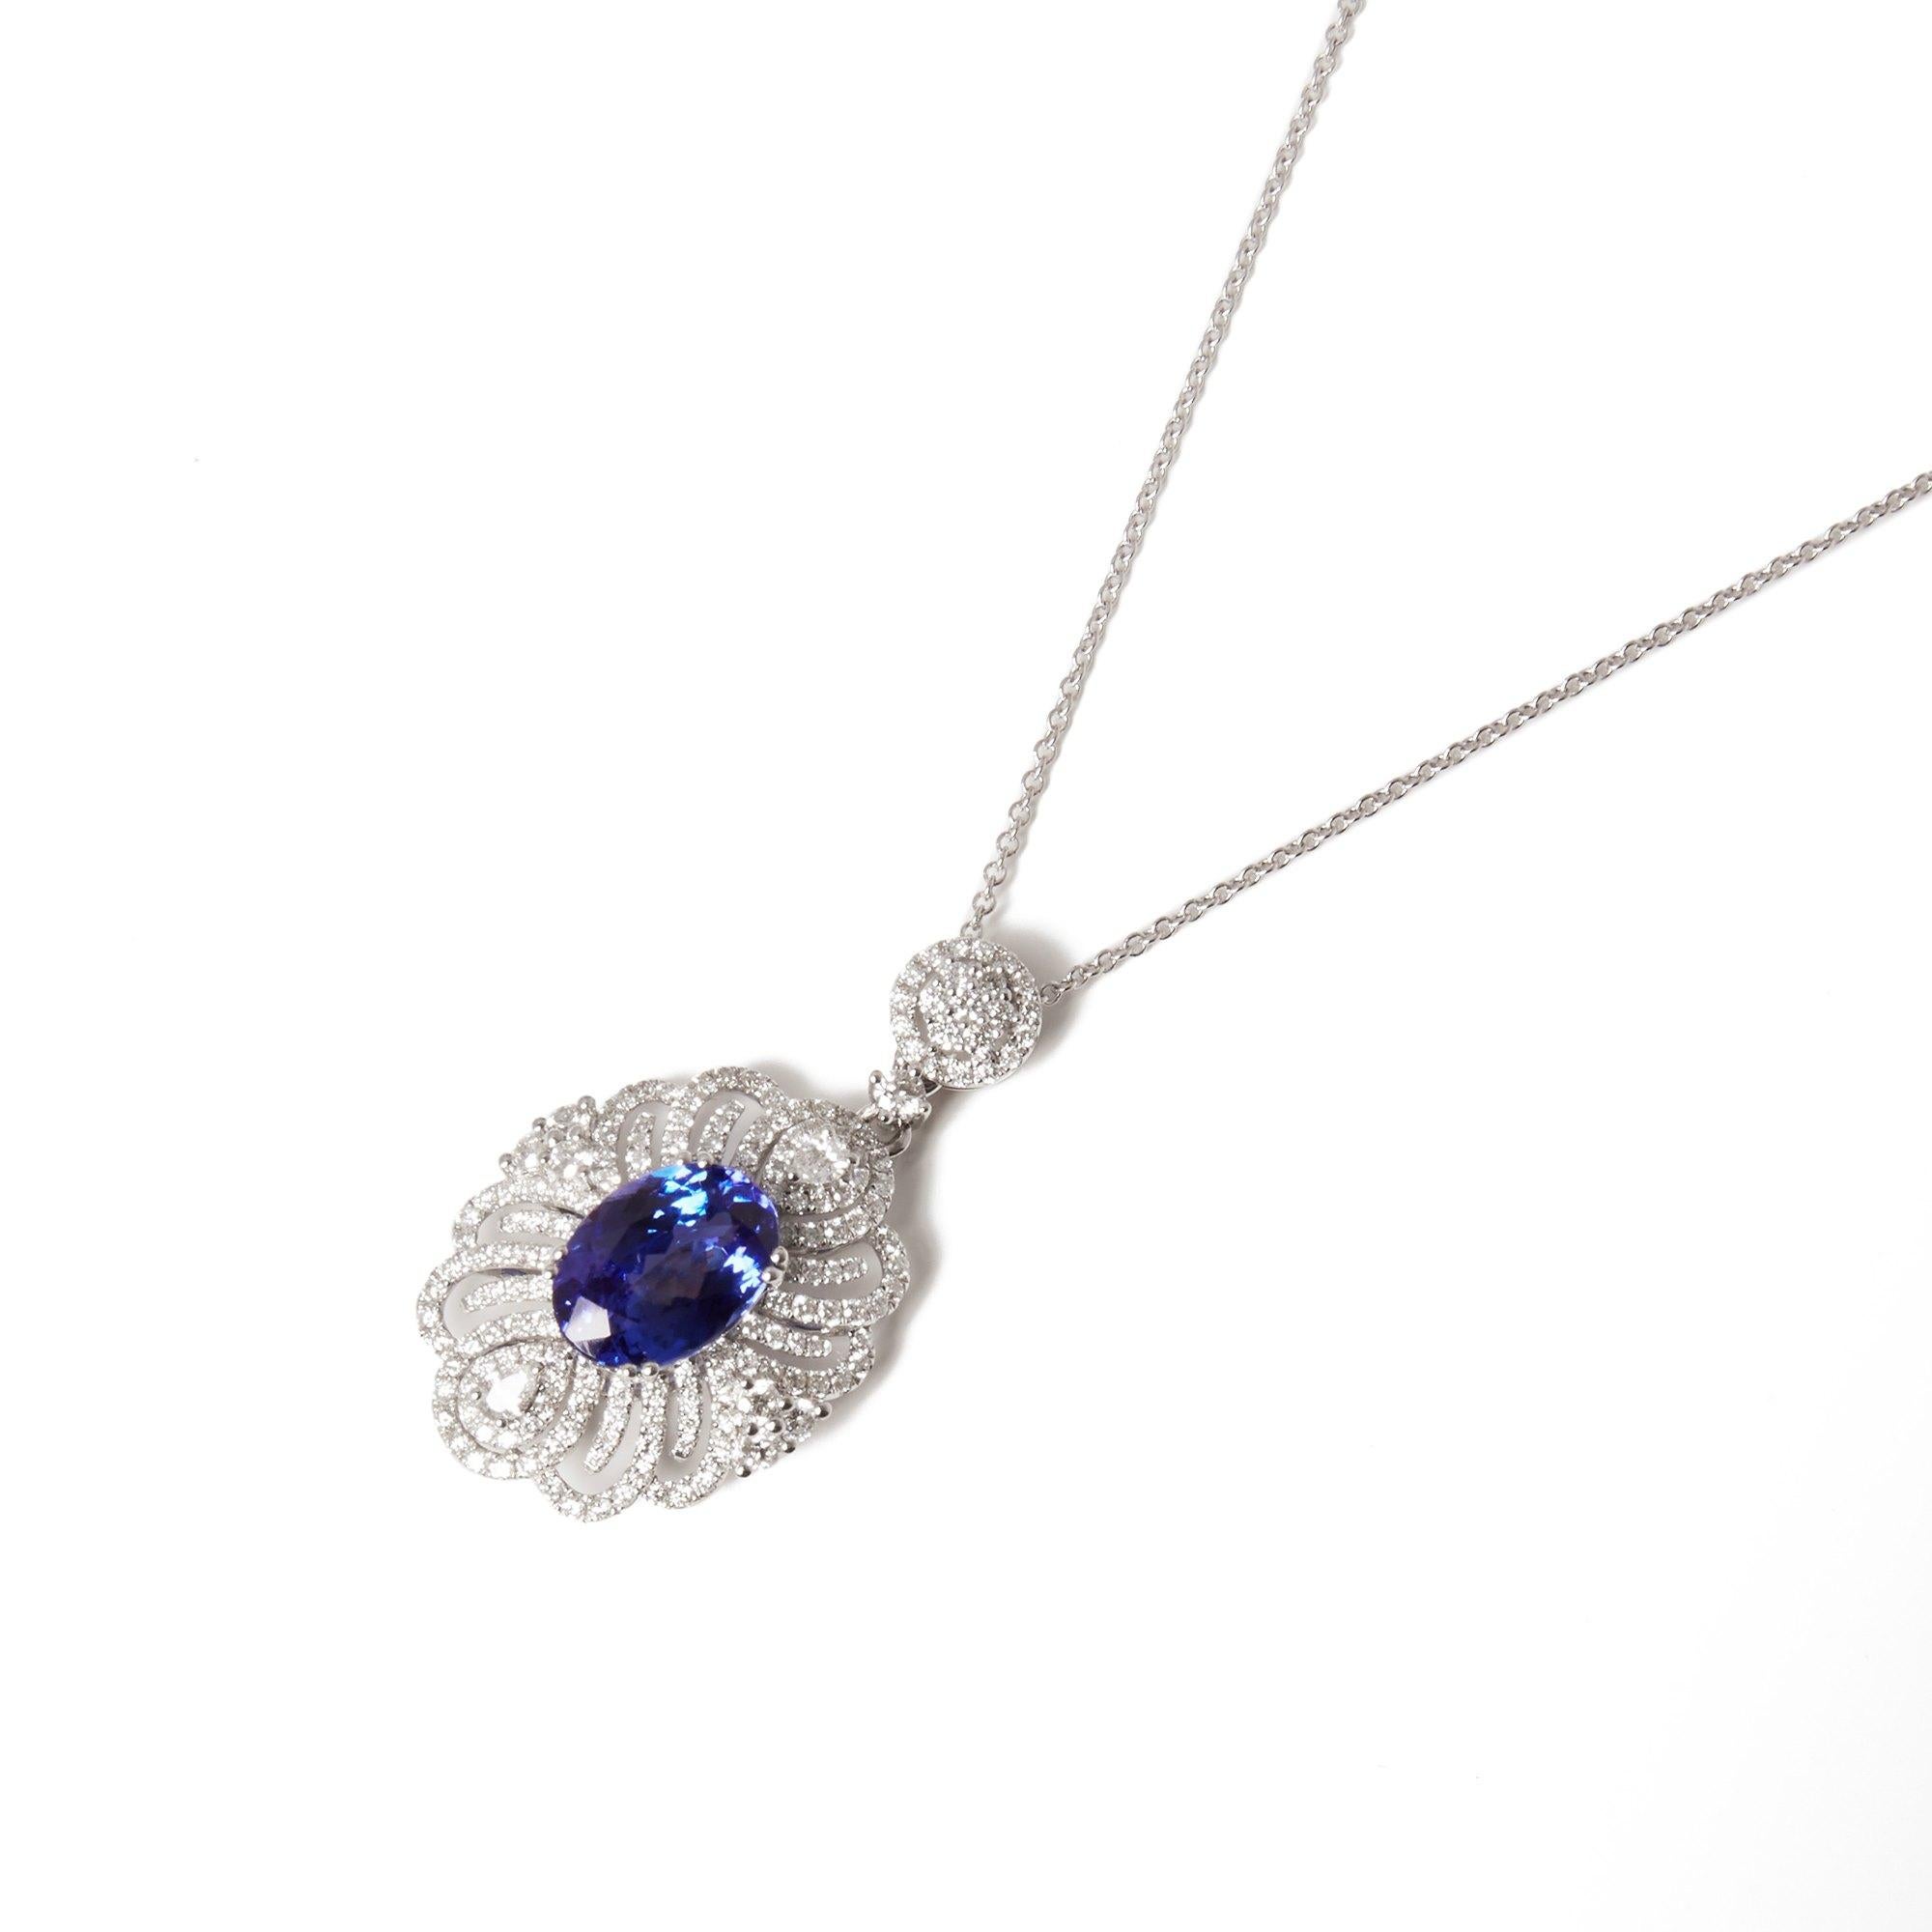 This Pendant Designed by David Jerome is from his Private Collection and features One Oval Cut Tanzanite Totalling 2.98cts Sourced in the D Block Mine Tanzania. Set with Round Brilliant Cut Diamonds Totalling 1.09cts Mounted in an 18k White Gold